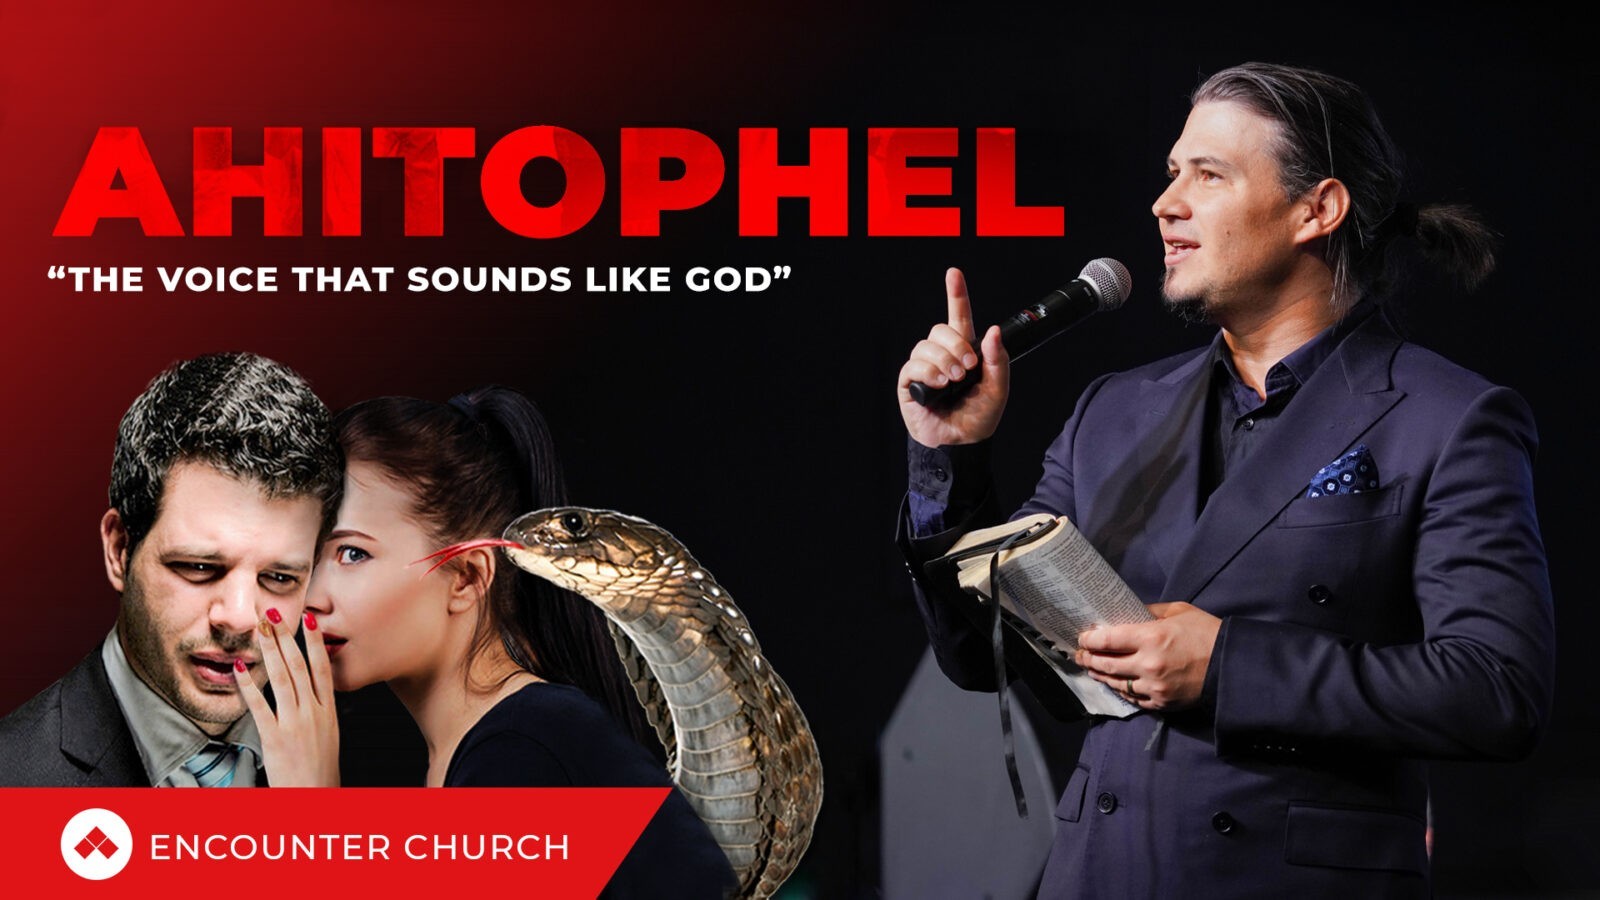 Ahitophel – The Voice that Sounds Like God